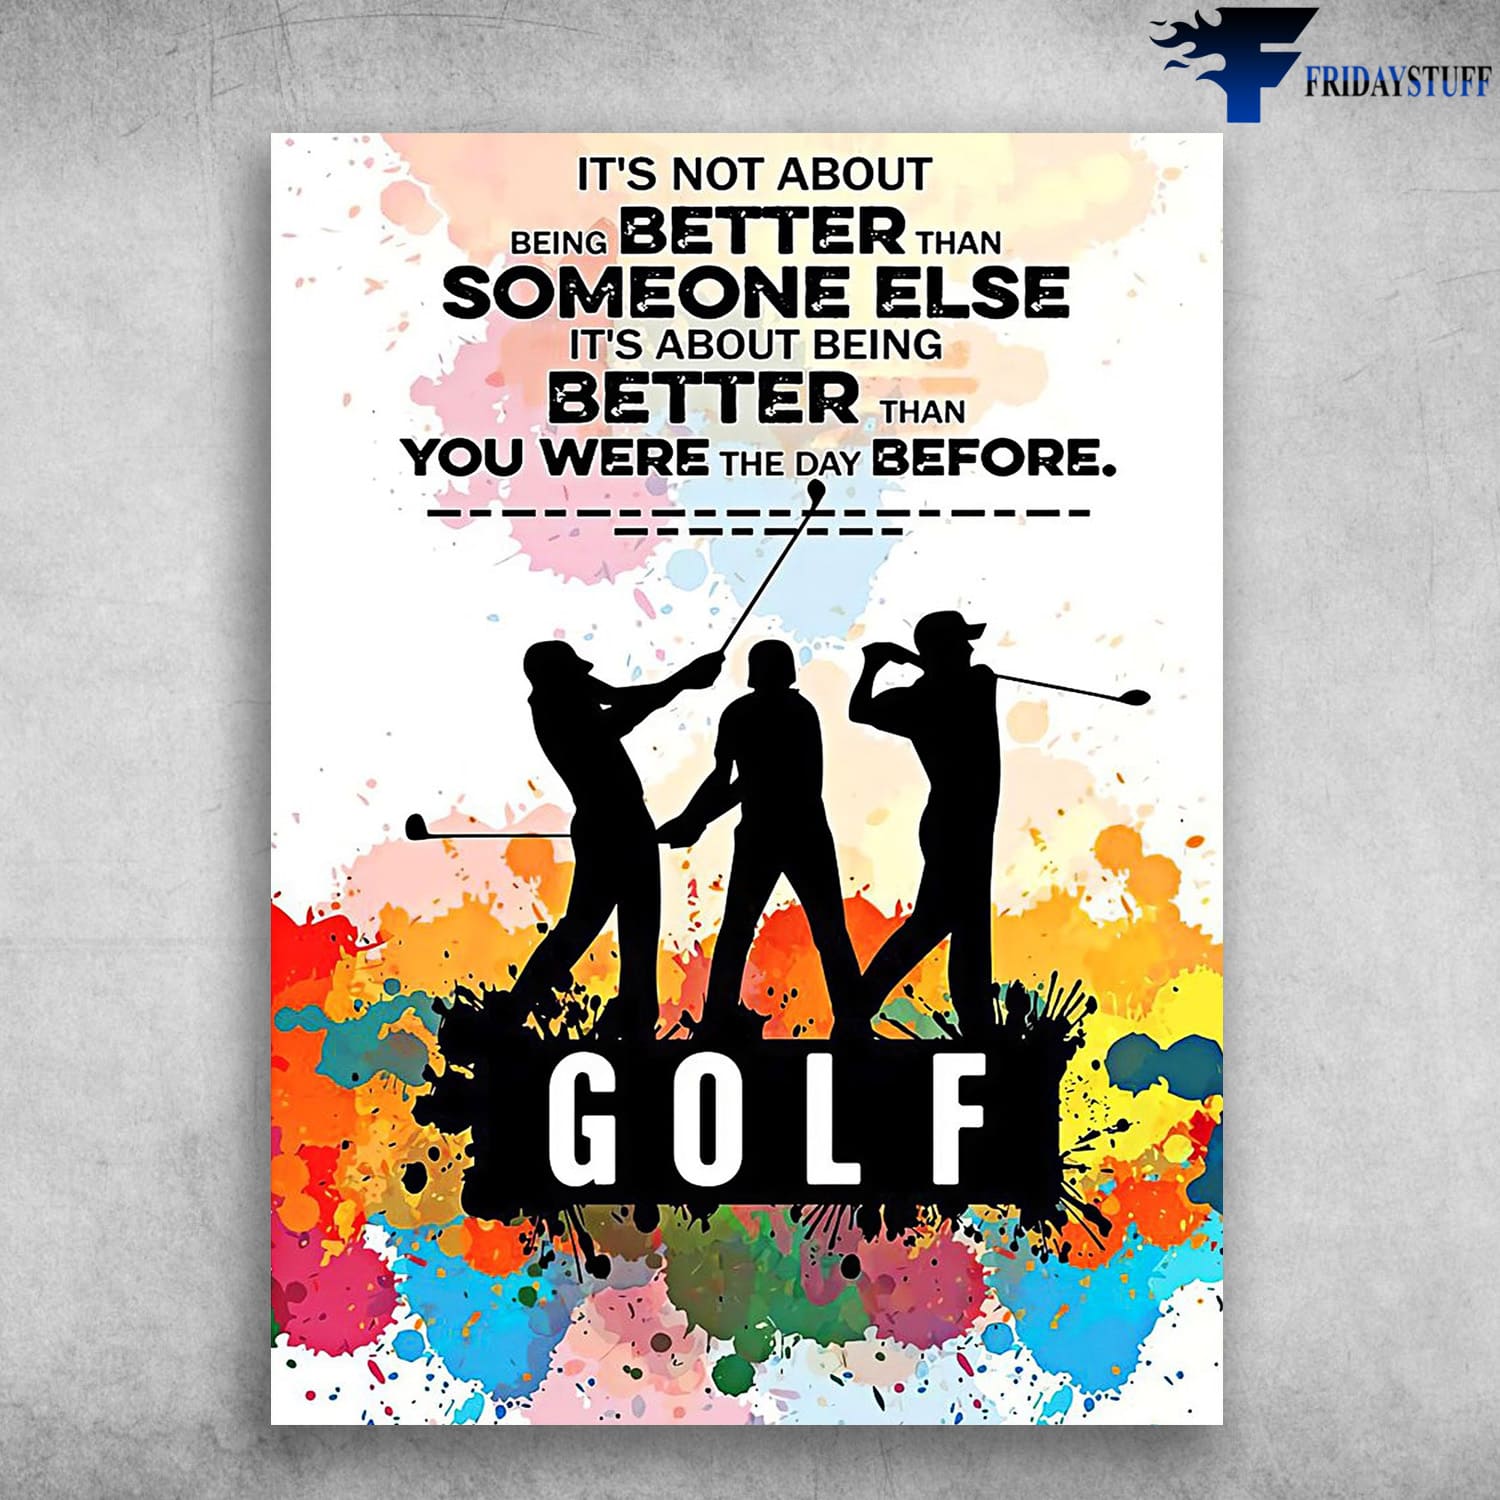 Golf Poster, Golf Men, It's Not About Being Better Than Someone Else, It's Abour Being Better Than You Were The Day Before